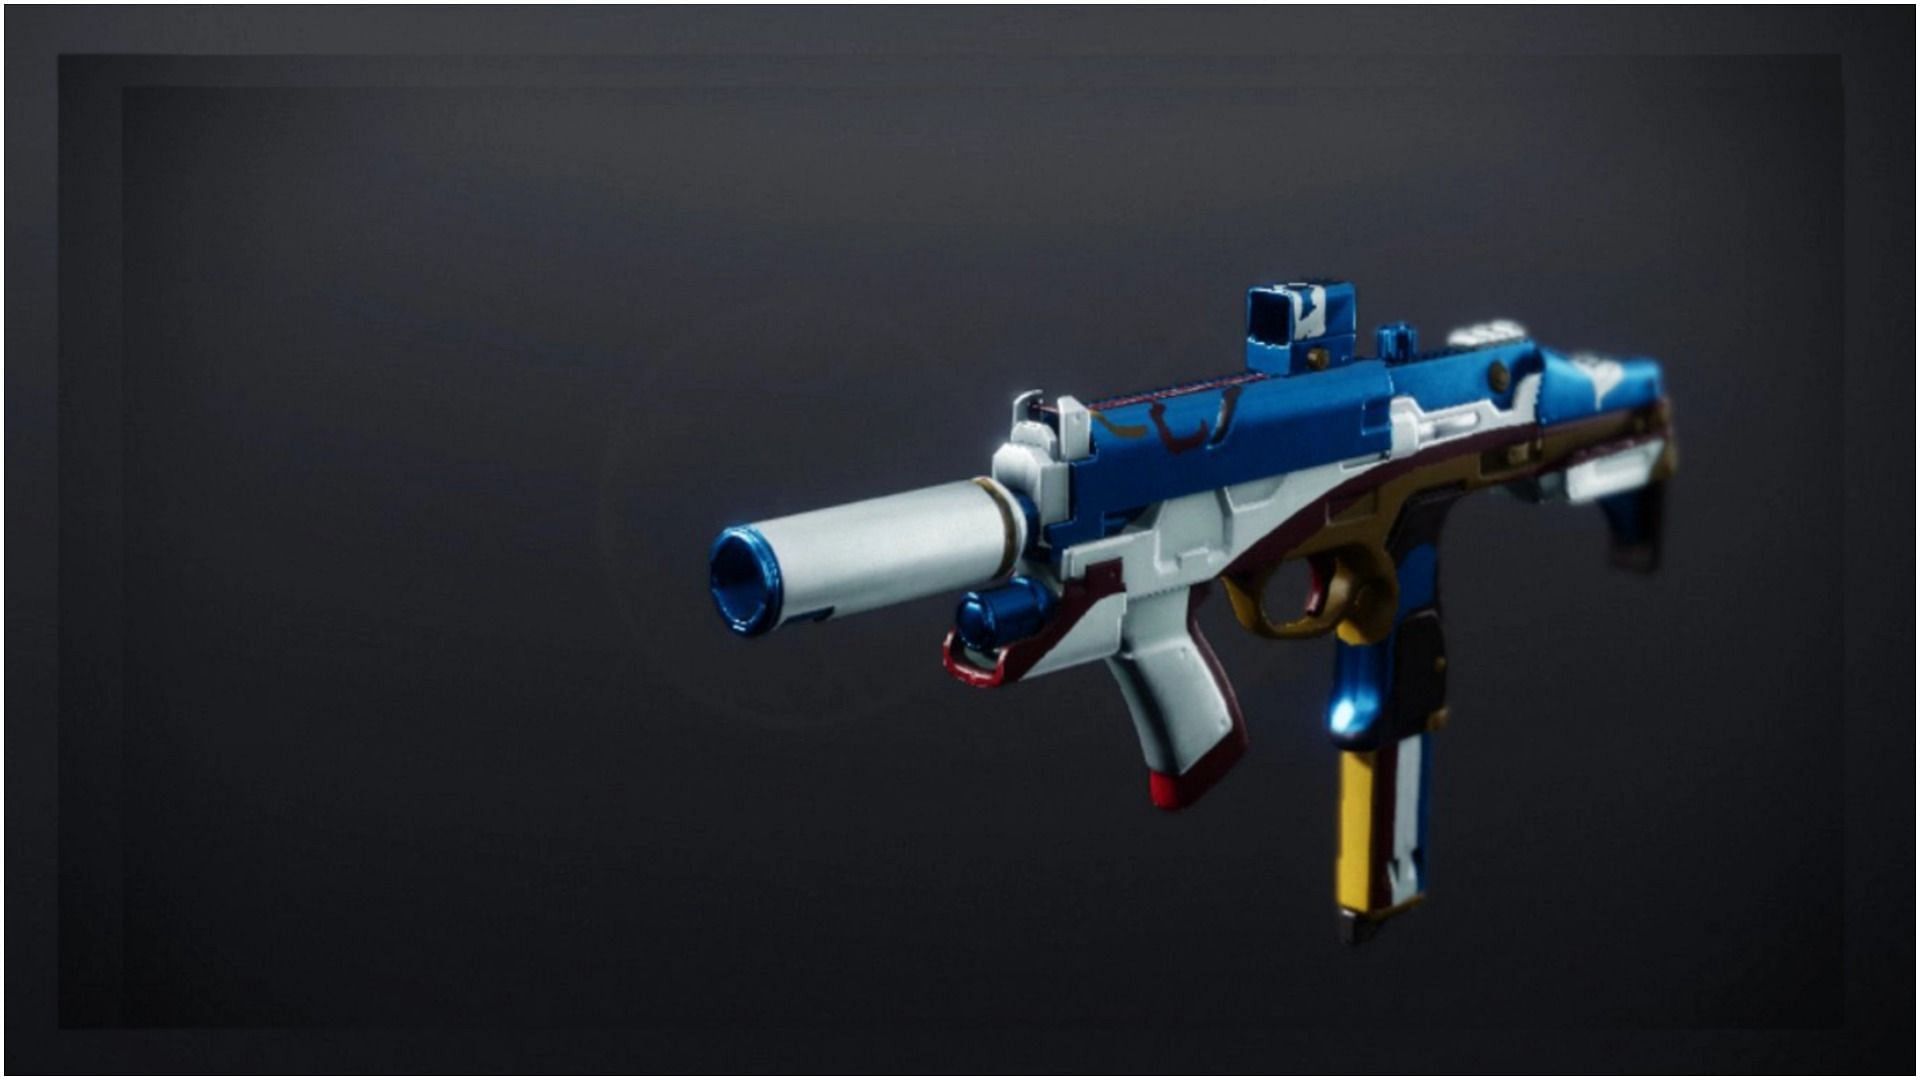 The upcoming Submachine gun for Guardian Games 2022 (Image via Bungie)